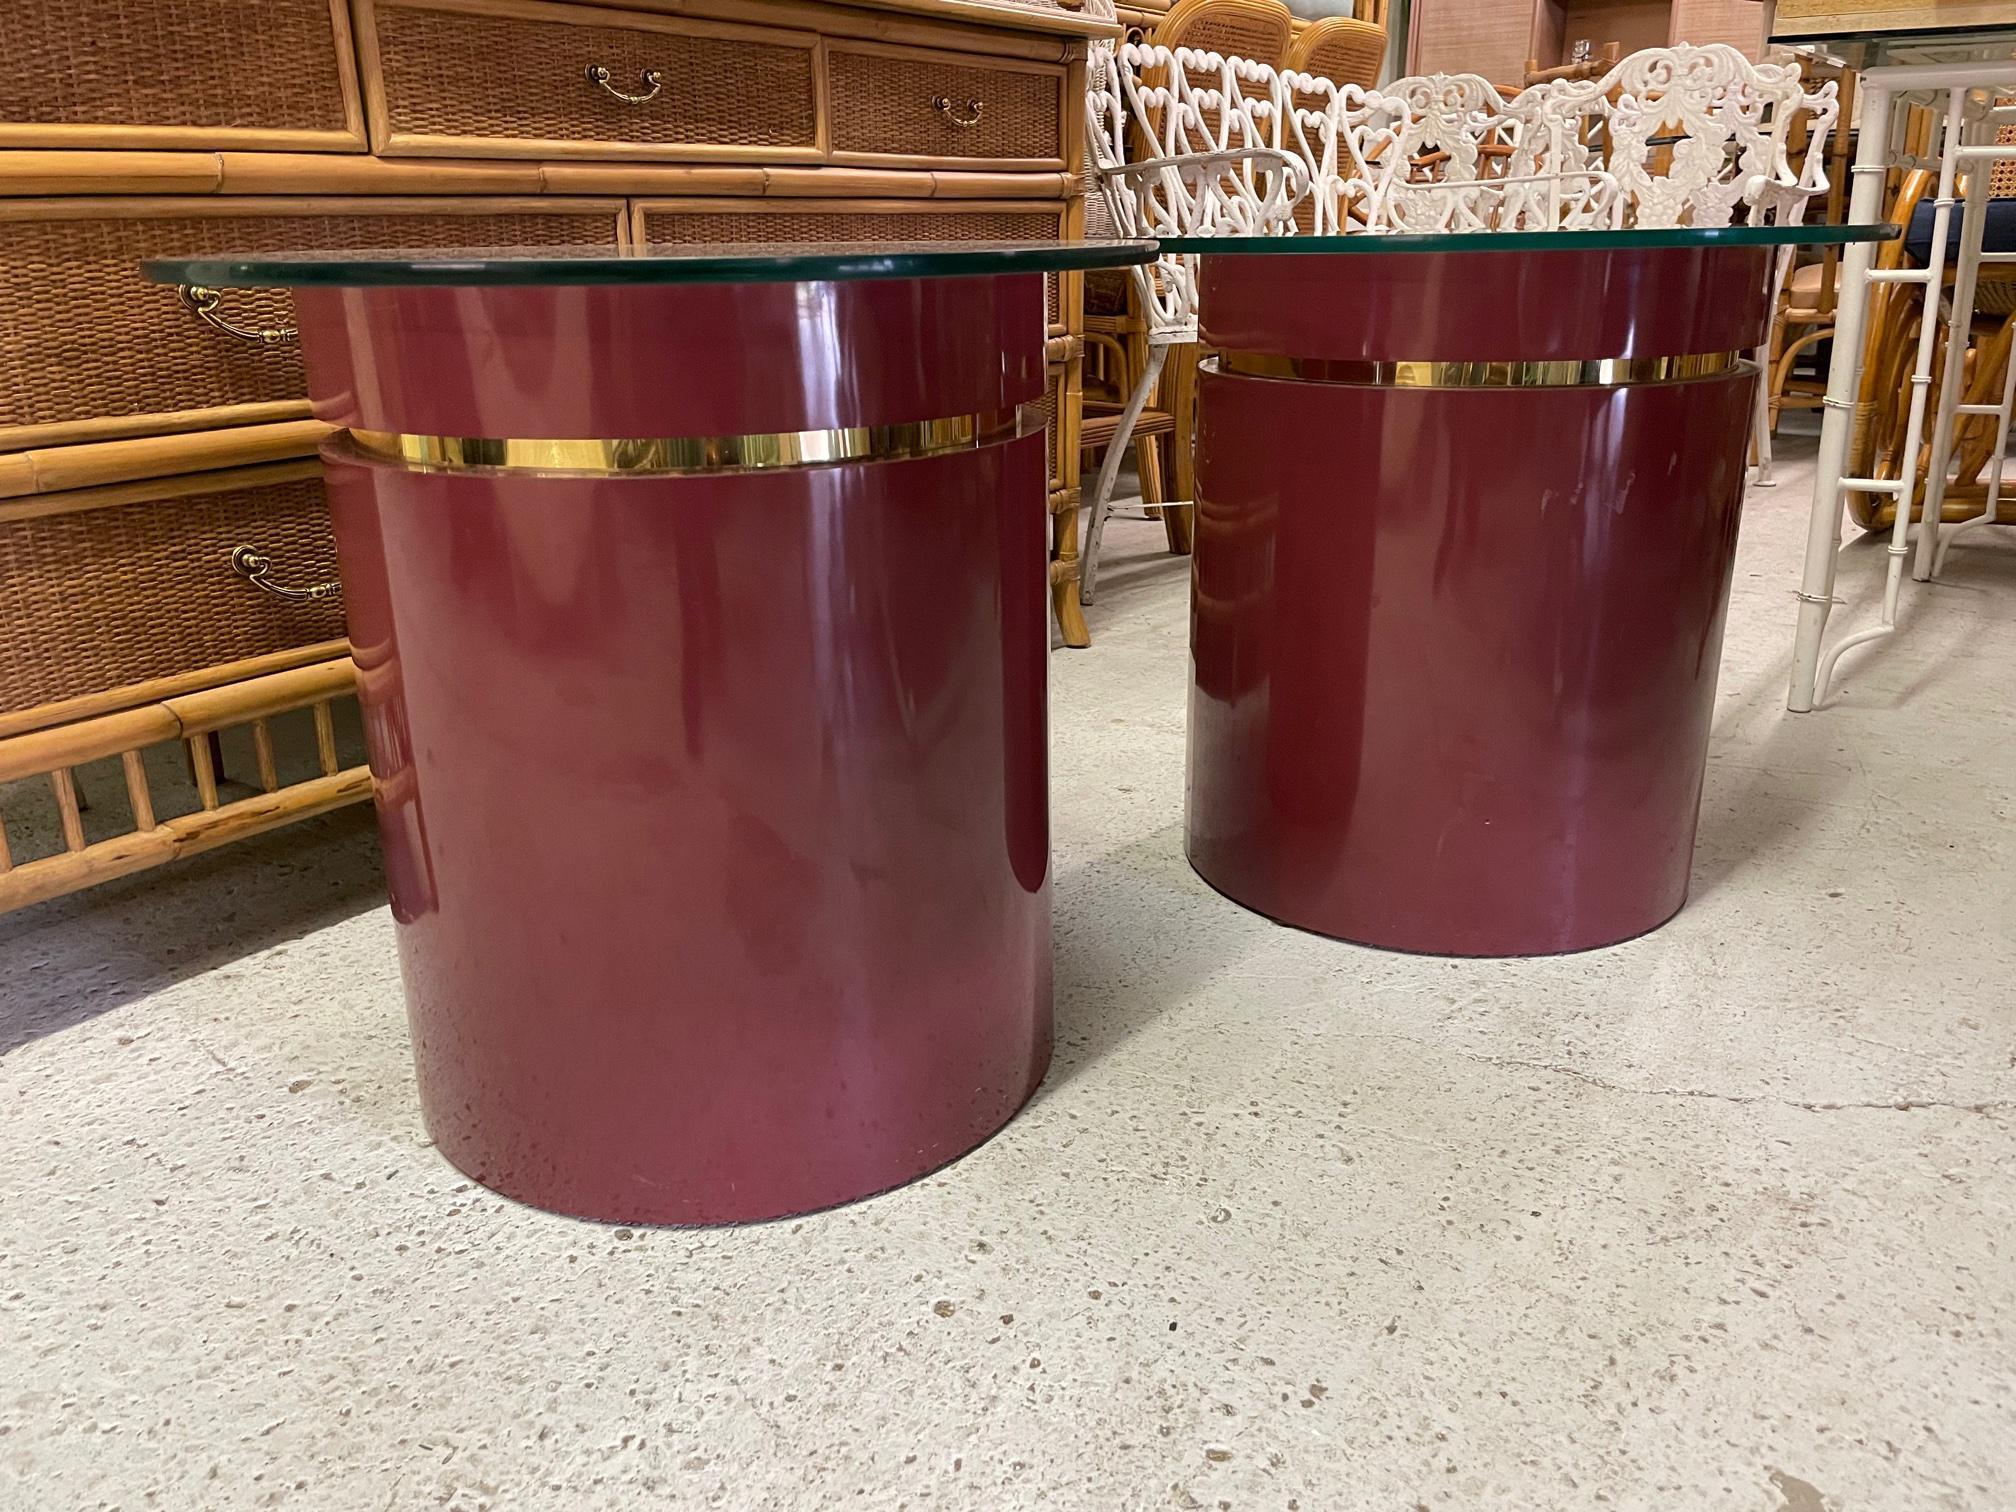 Pair of 1980s drum shaped end table feature brass ring accents and a heavy glass top. Can. be used with glass tops or without. Good condition with minor imperfections consistent with age, see photos for condition details.
For a shipping quote to